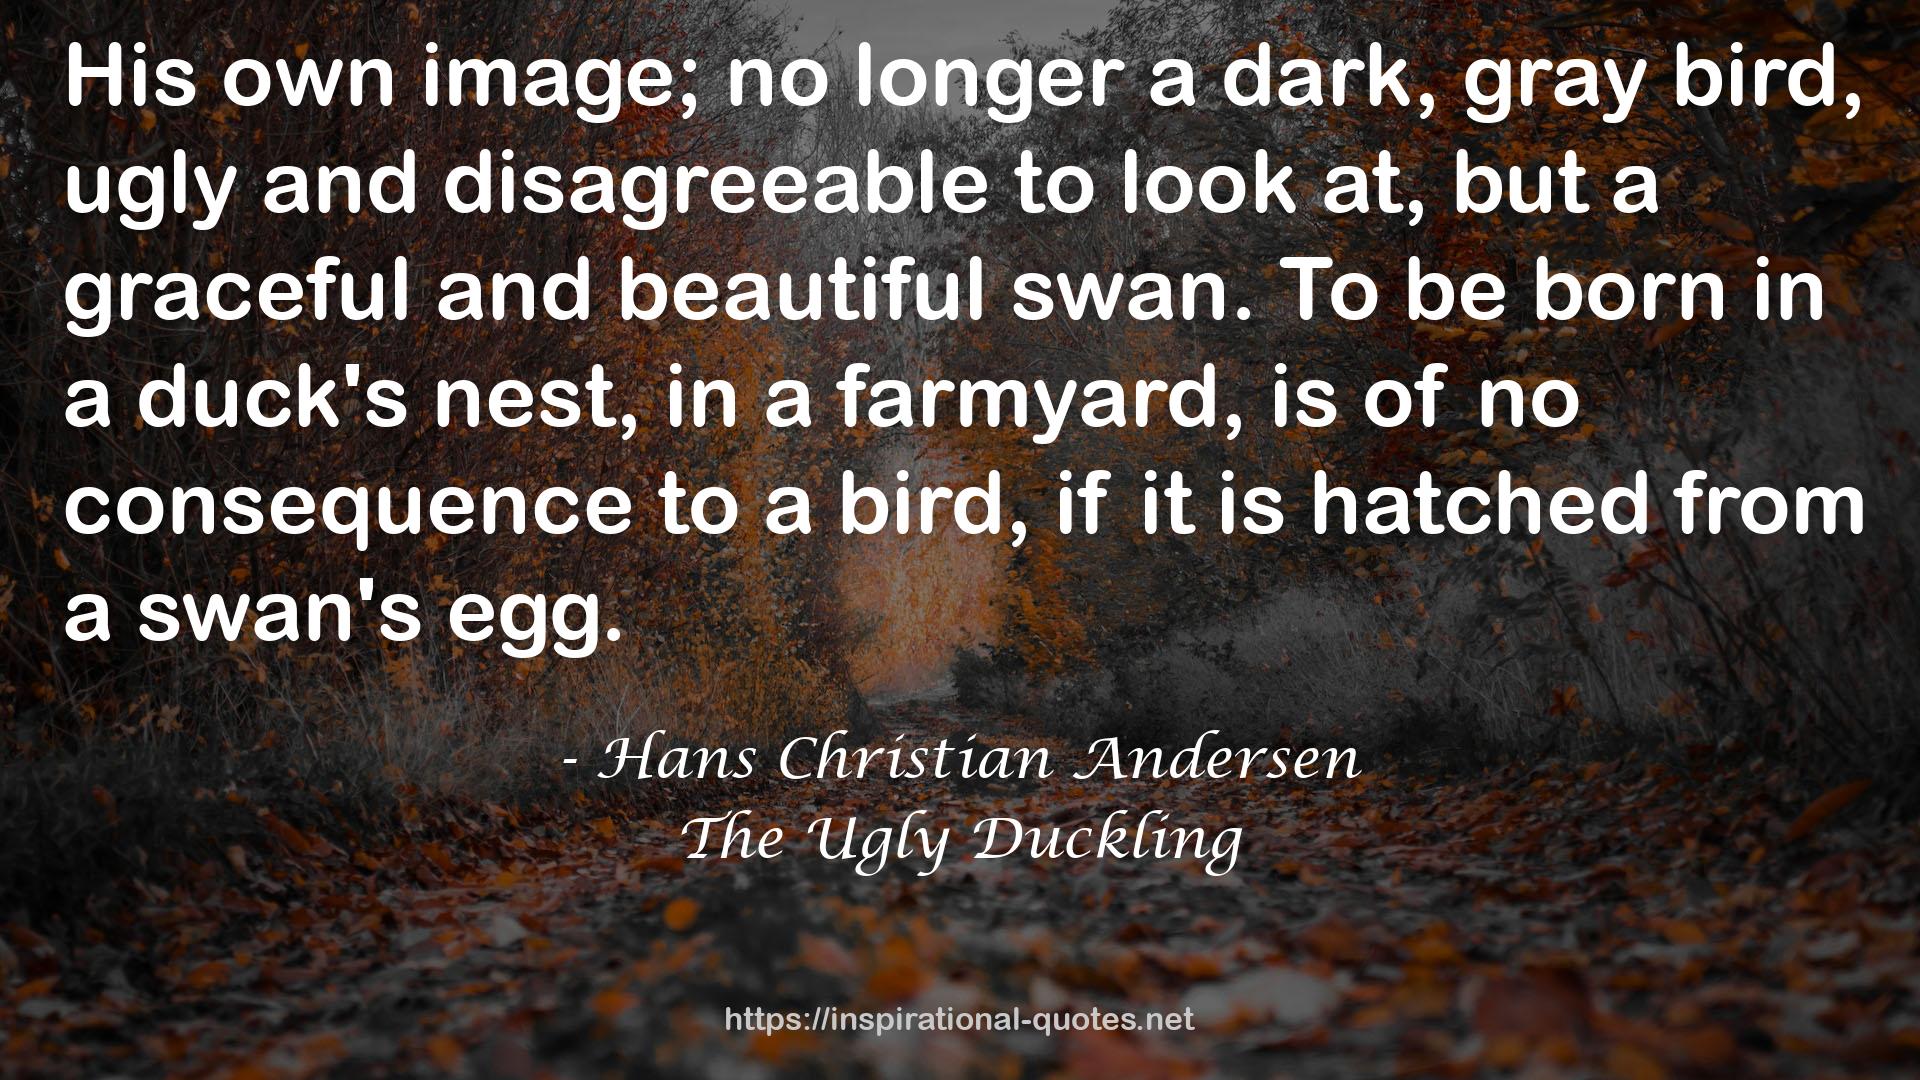 The Ugly Duckling QUOTES